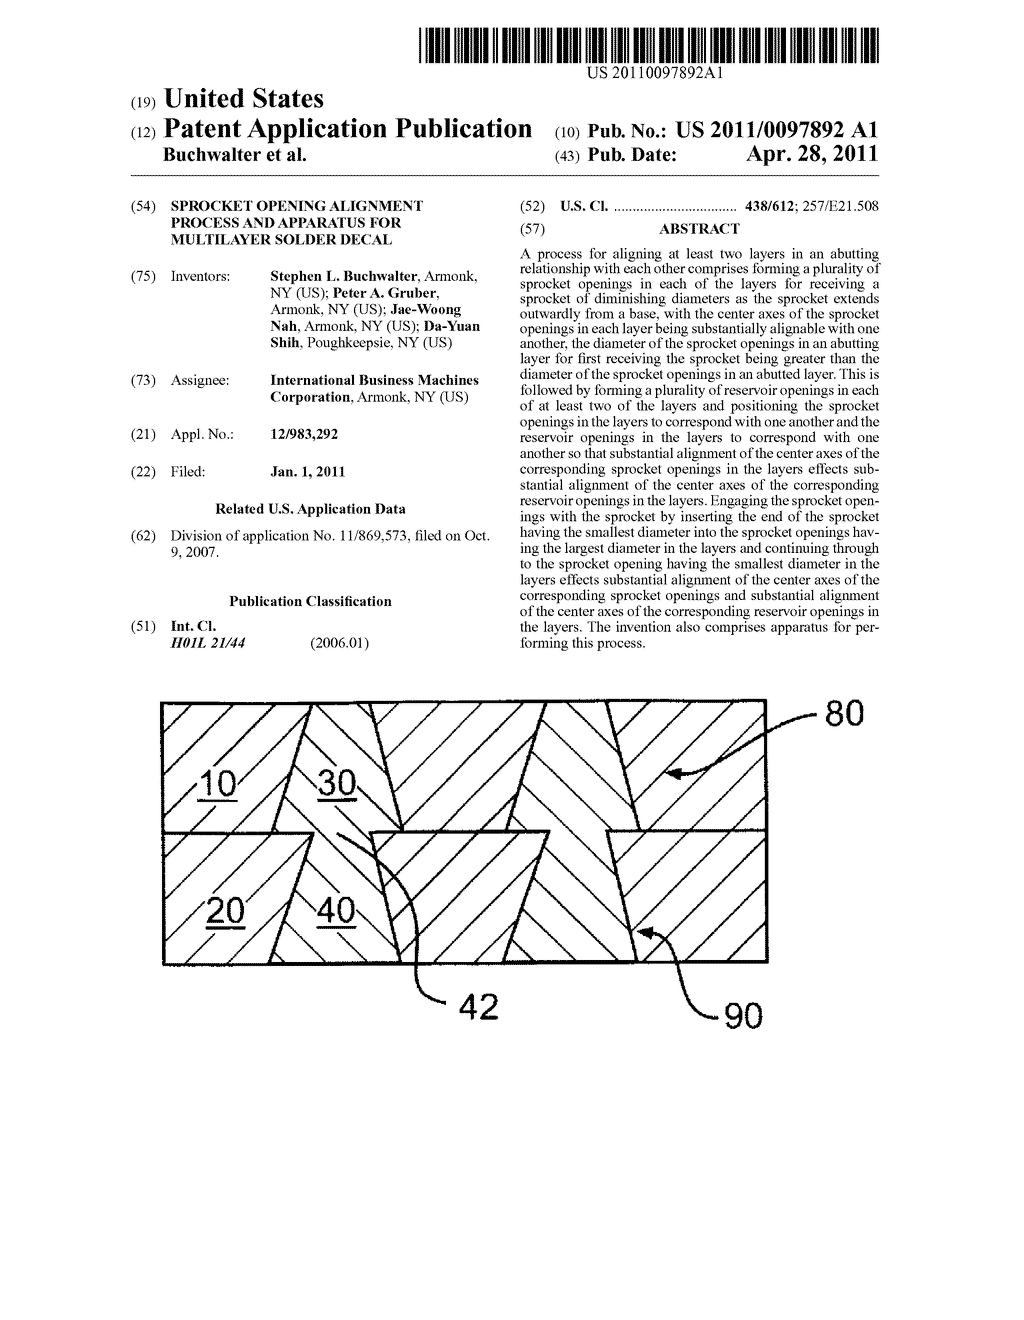 Sprocket Opening Alignment Process and Apparatus for Multilayer Solder Decal - diagram, schematic, and image 01